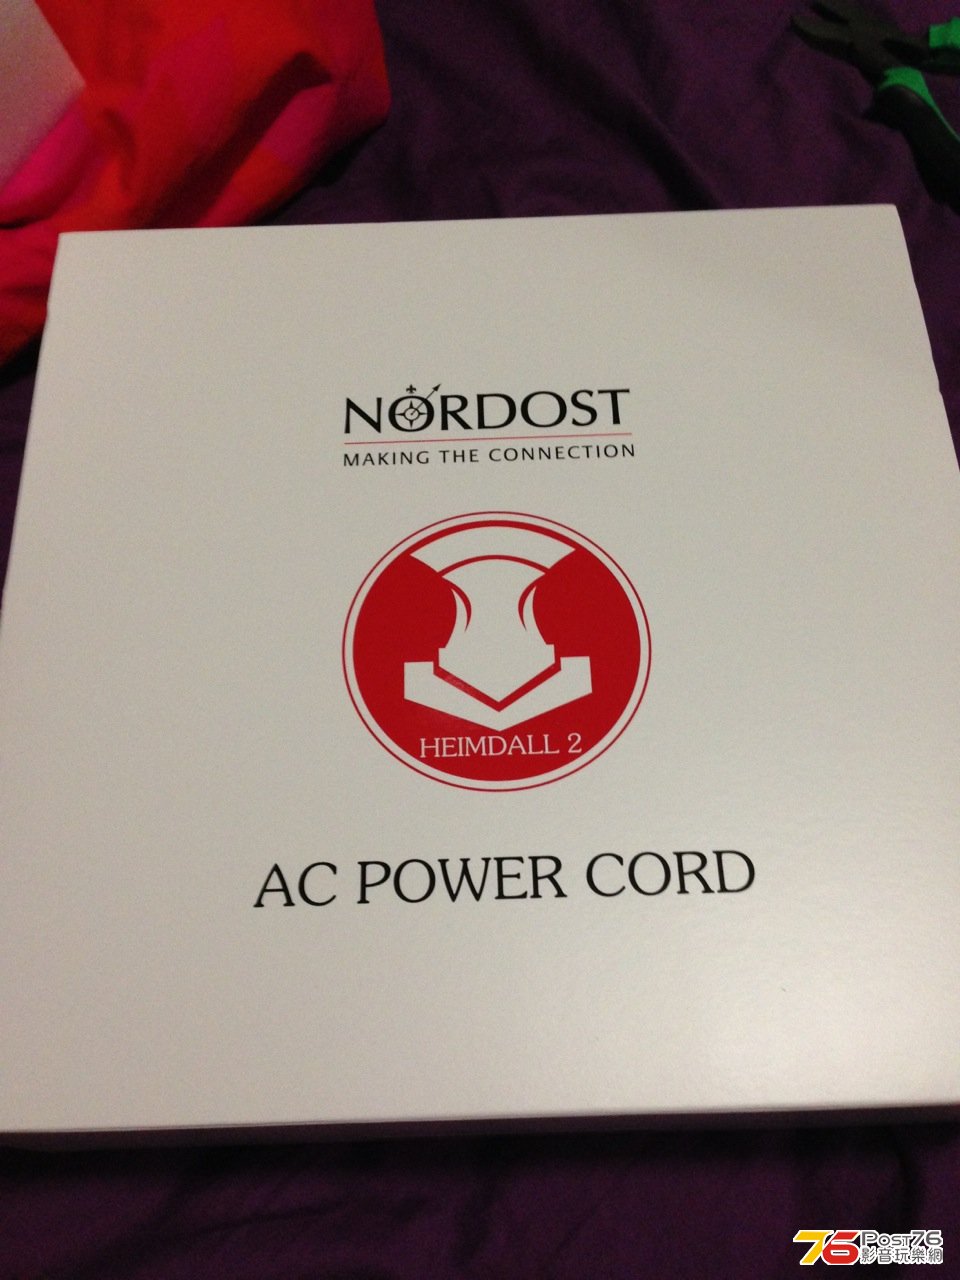 Nordost Heimdall 2 for BDP-105